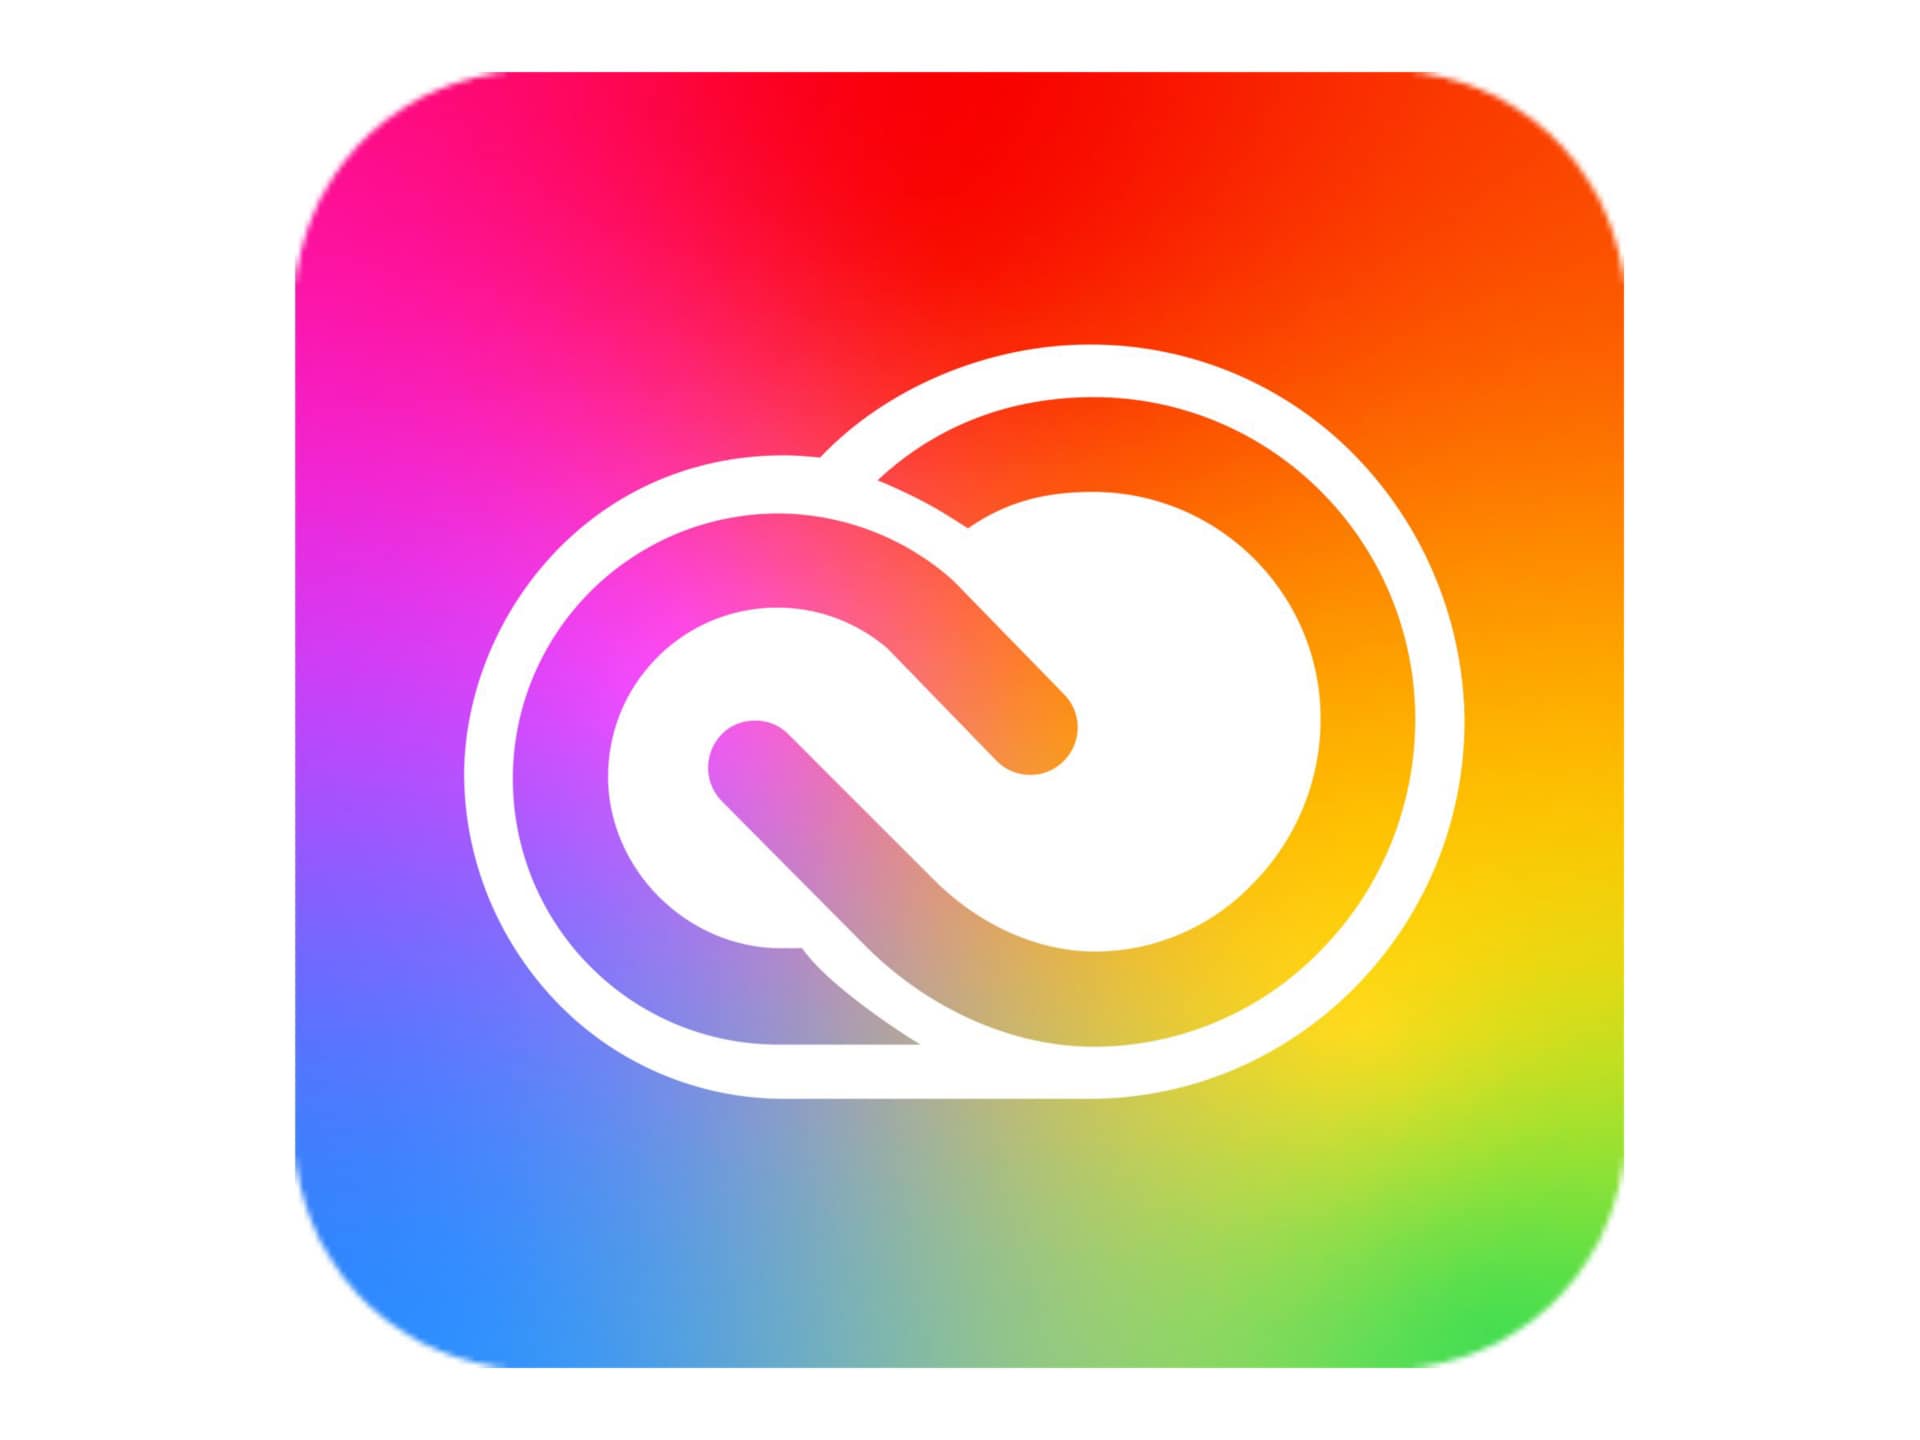 Adobe Creative Cloud for Enterprise - All Apps - Subscription New (6 months) - 1 device